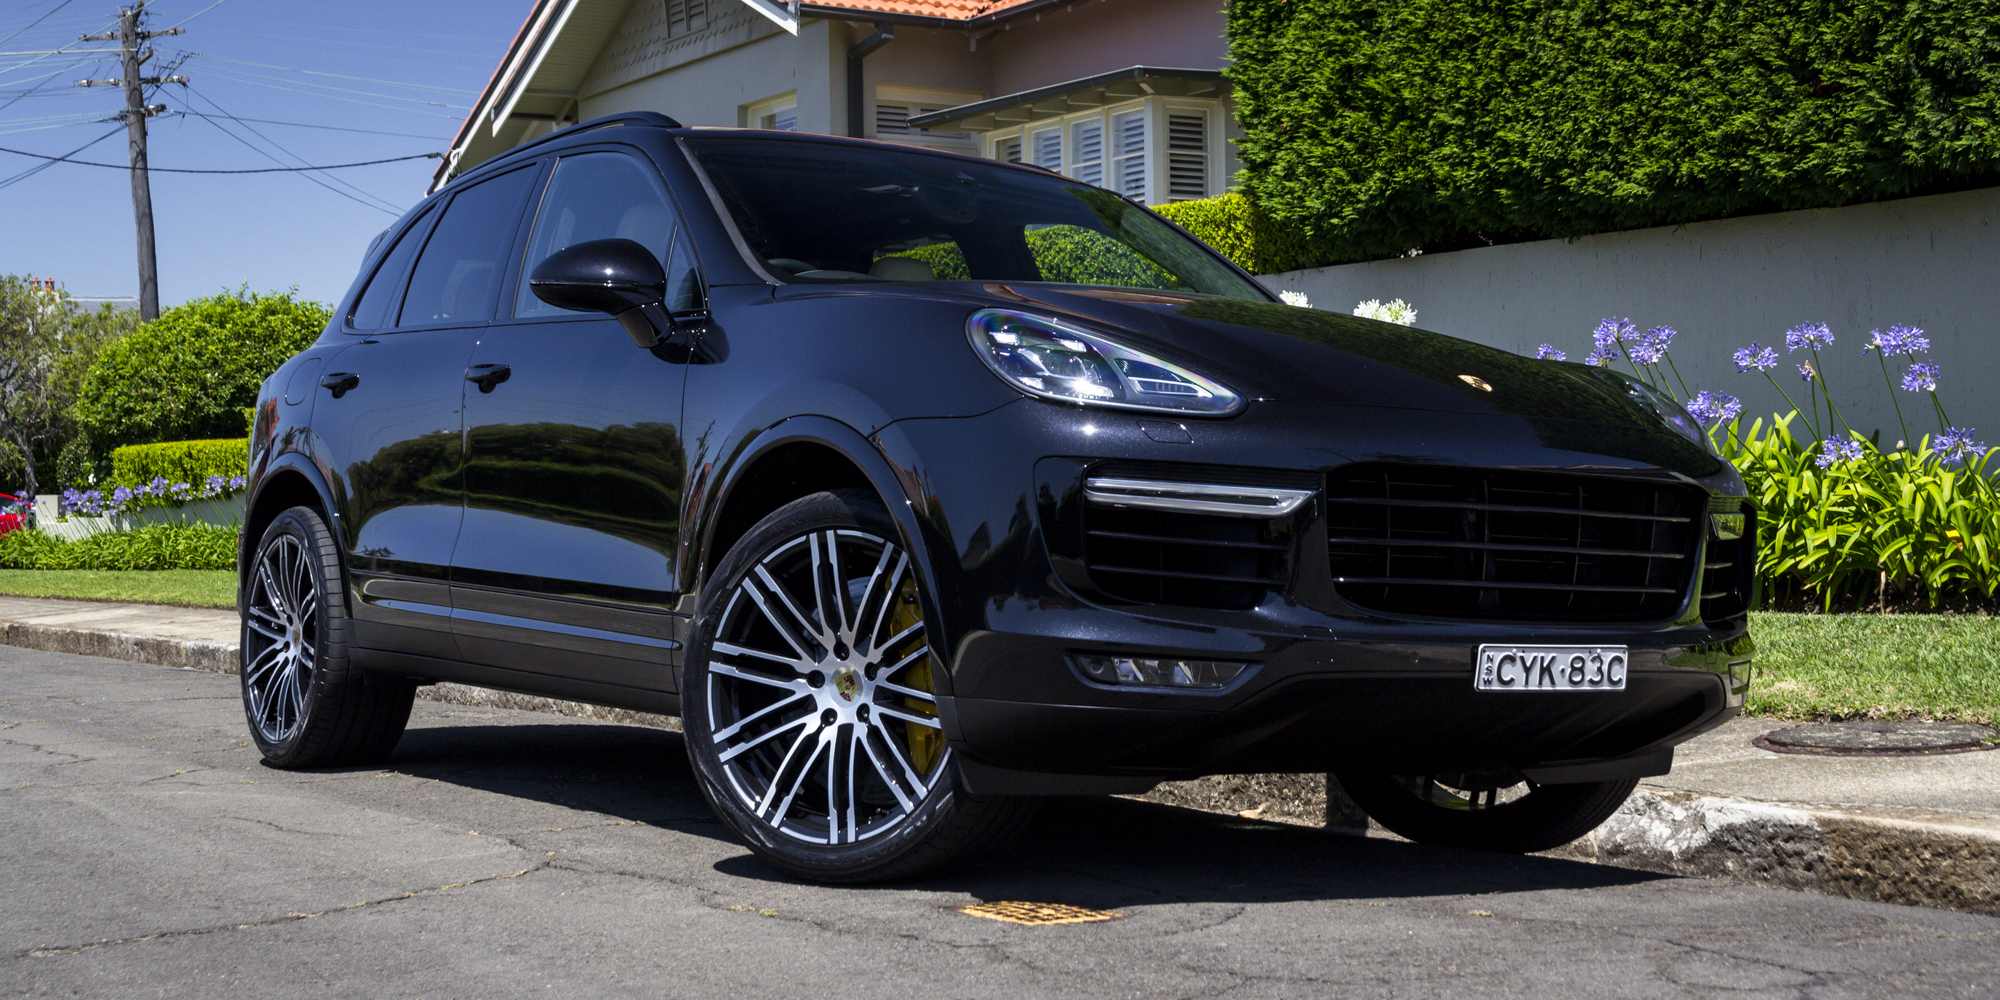 2016 Porsche Cayenne Turbo S Review  CarAdvice